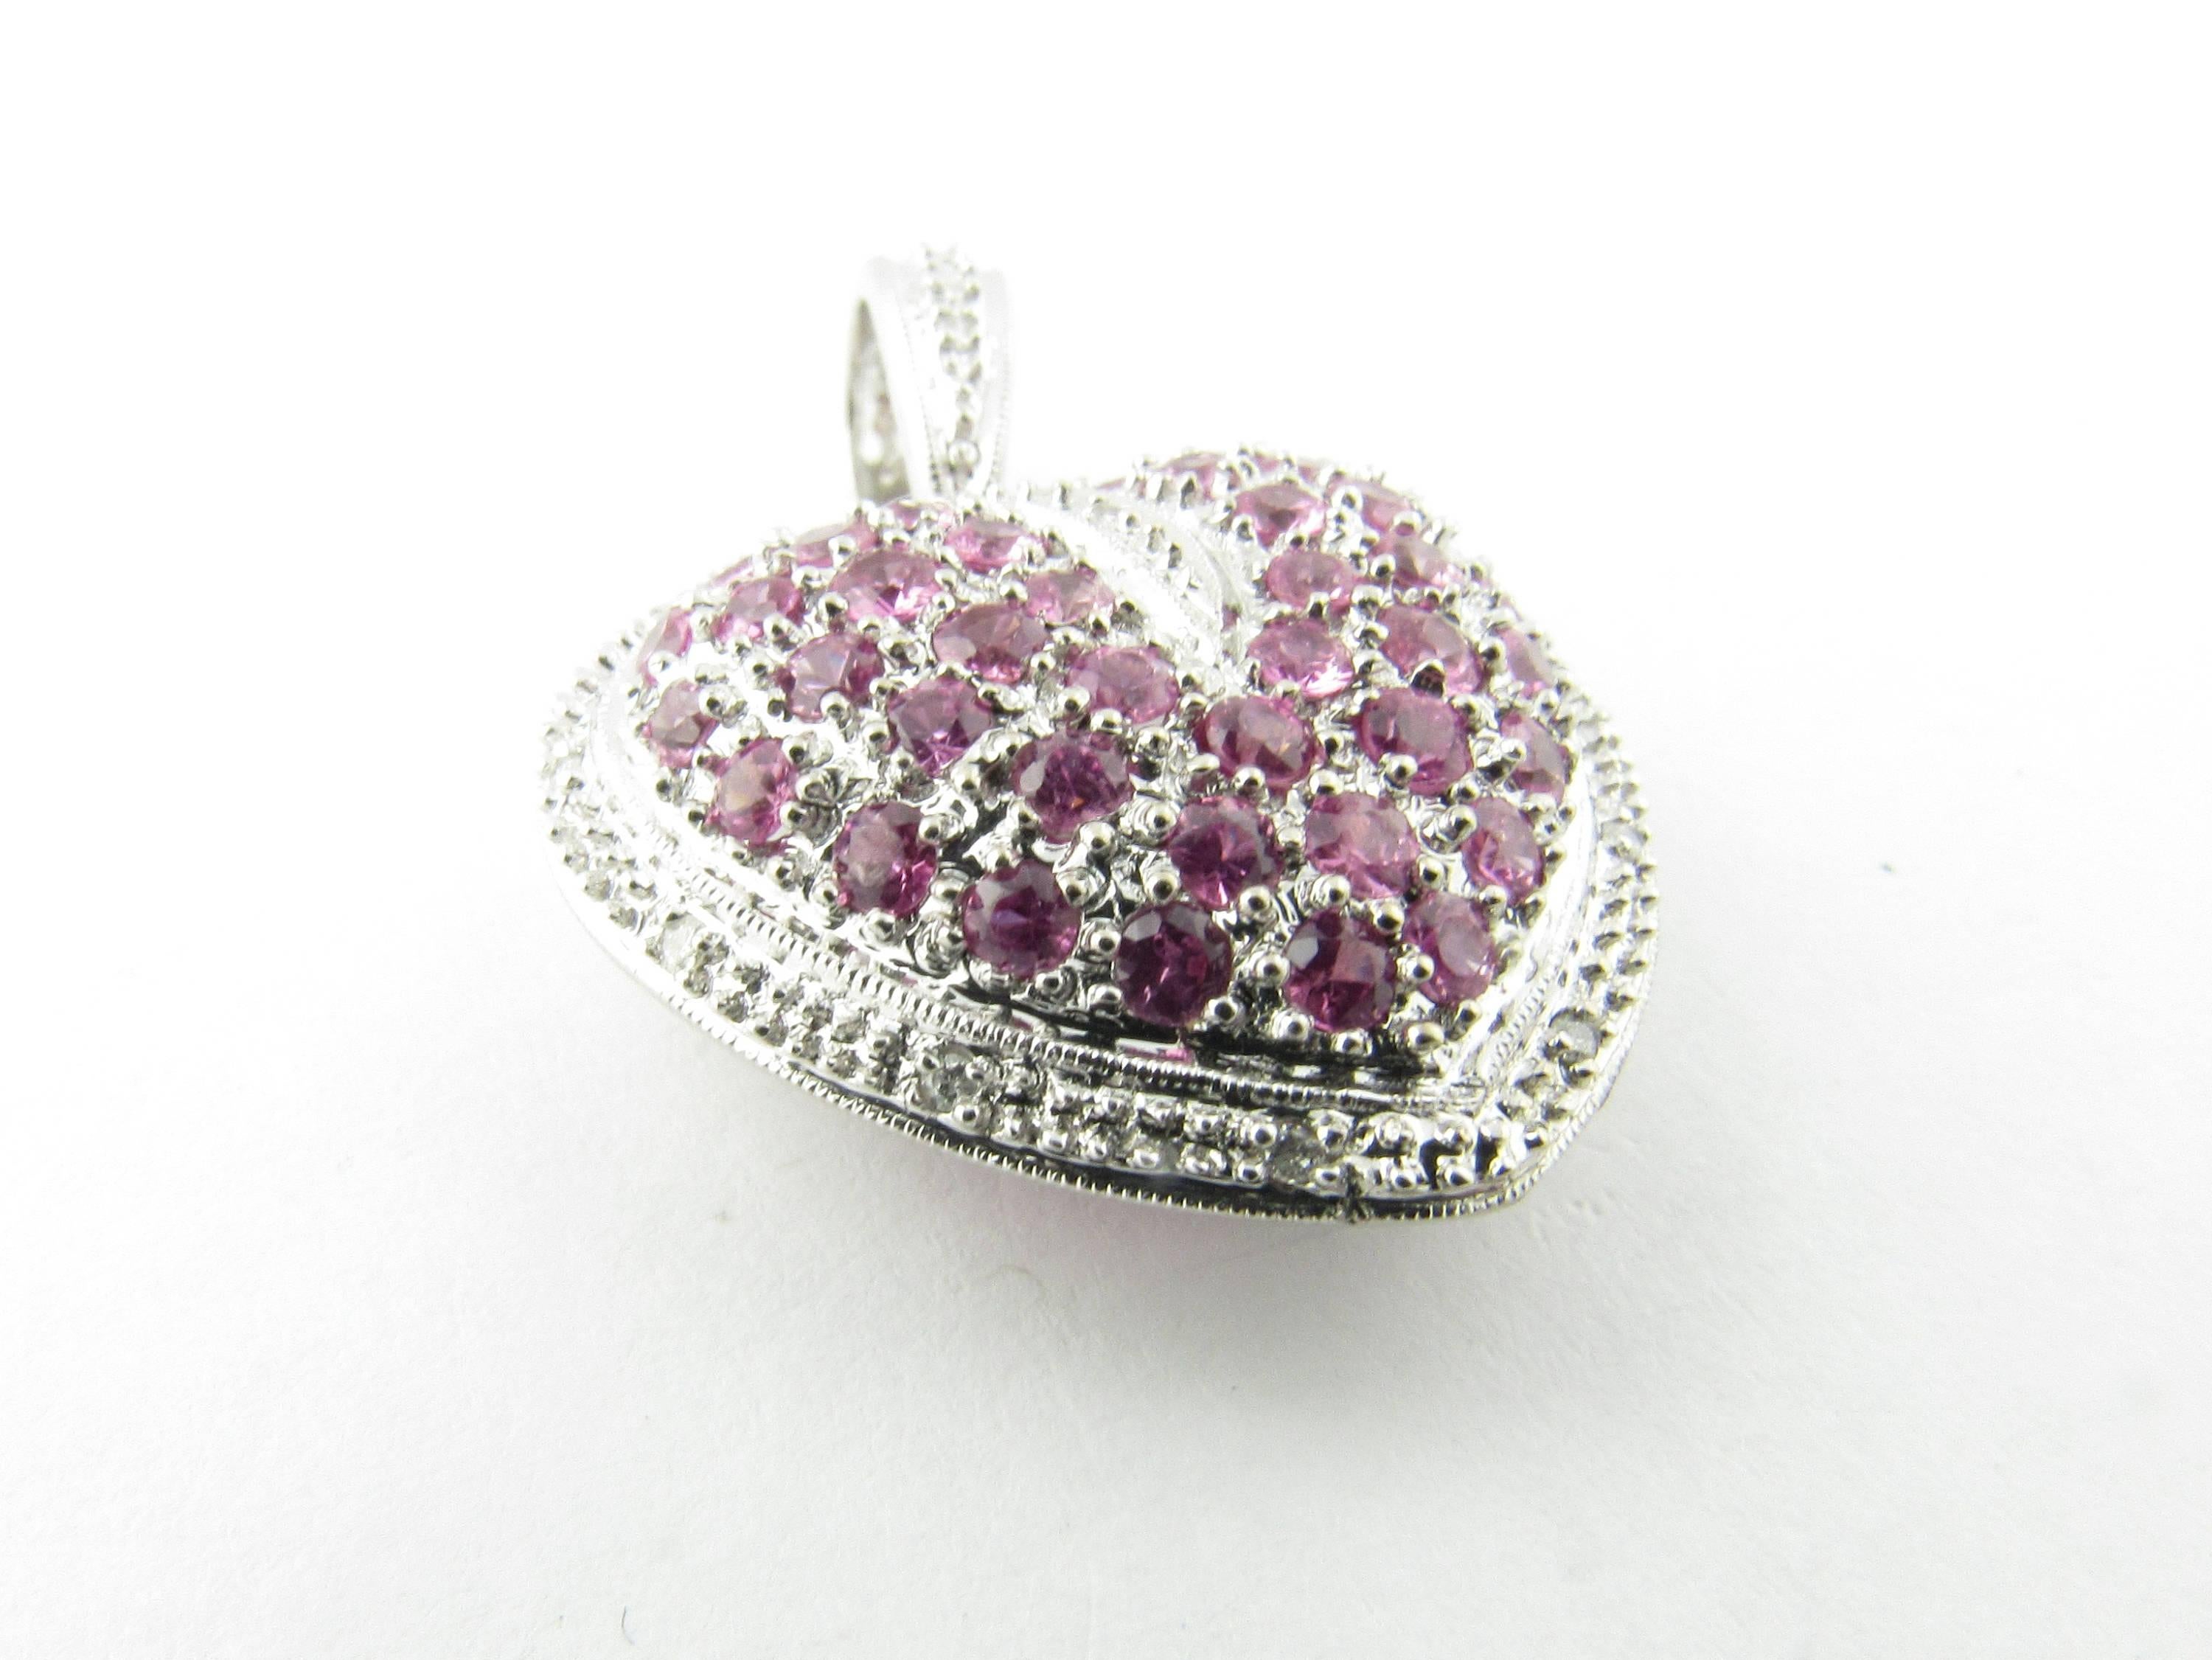 Vintage 14 Karat White Gold Pink Topaz and Diamond Heart Pendant-

This dazzling 3D heart pendant features 40 pink topaz stones surrounded by 12 round brilliant cut diamonds set in beautifully detailed 14K white gold.

Approximate total diamond